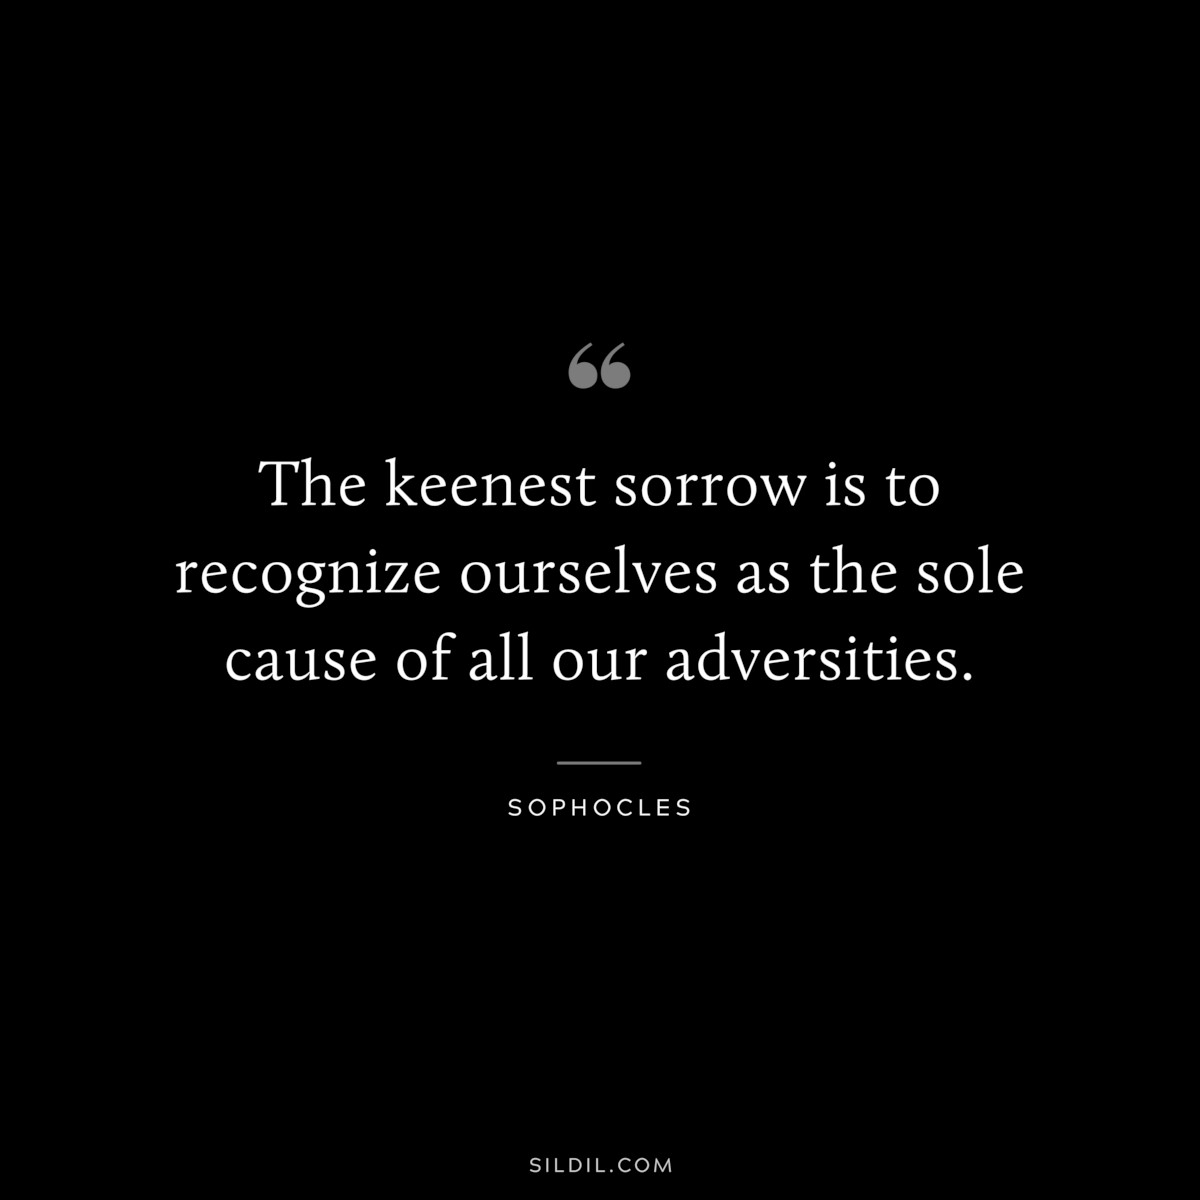 The keenest sorrow is to recognize ourselves as the sole cause of all our adversities. ― Sophocles